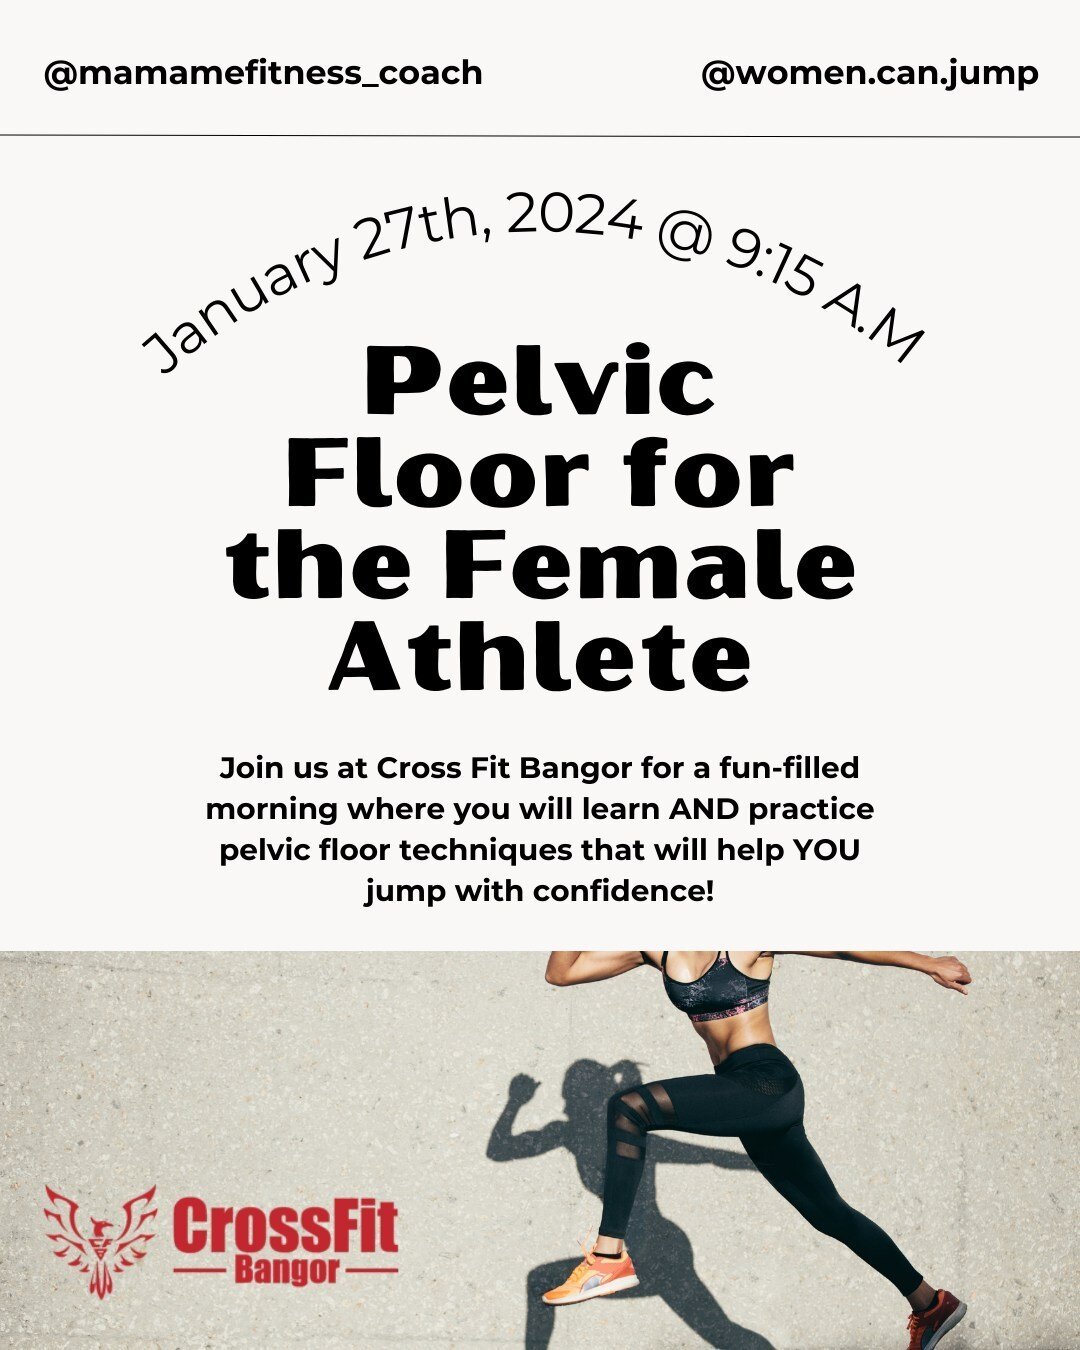 Just a few spots left! Link in Bio

➡This fun and educational workshop is aimed to teach you how to effectively address your pelvic floor while exercising and learn about its significance during overload type movements.

➡The pelvic floor is an impor